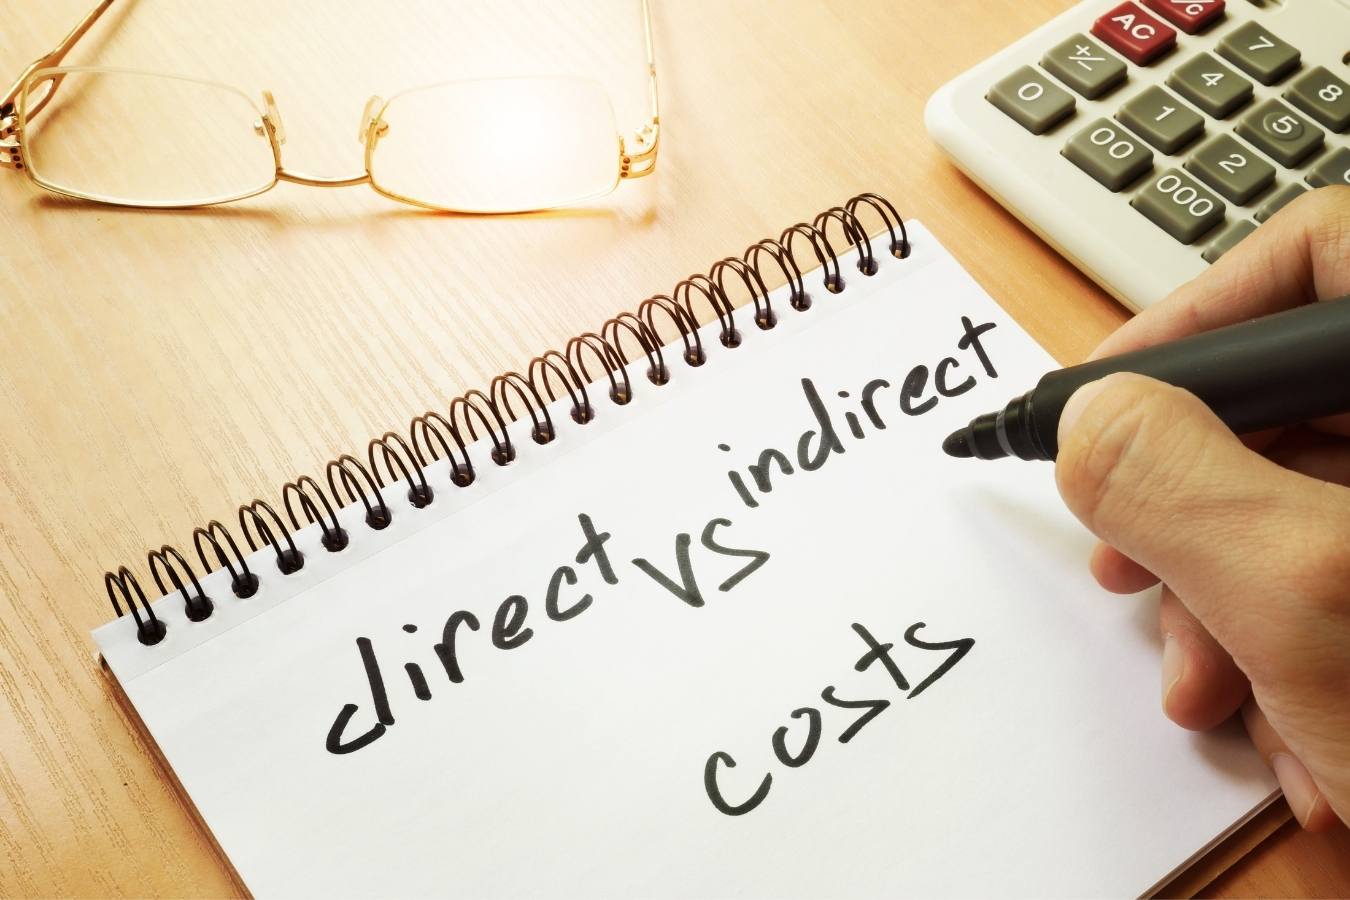 DIFFERENCES BETWEEN DIRECT AND INDIRECT COSTS